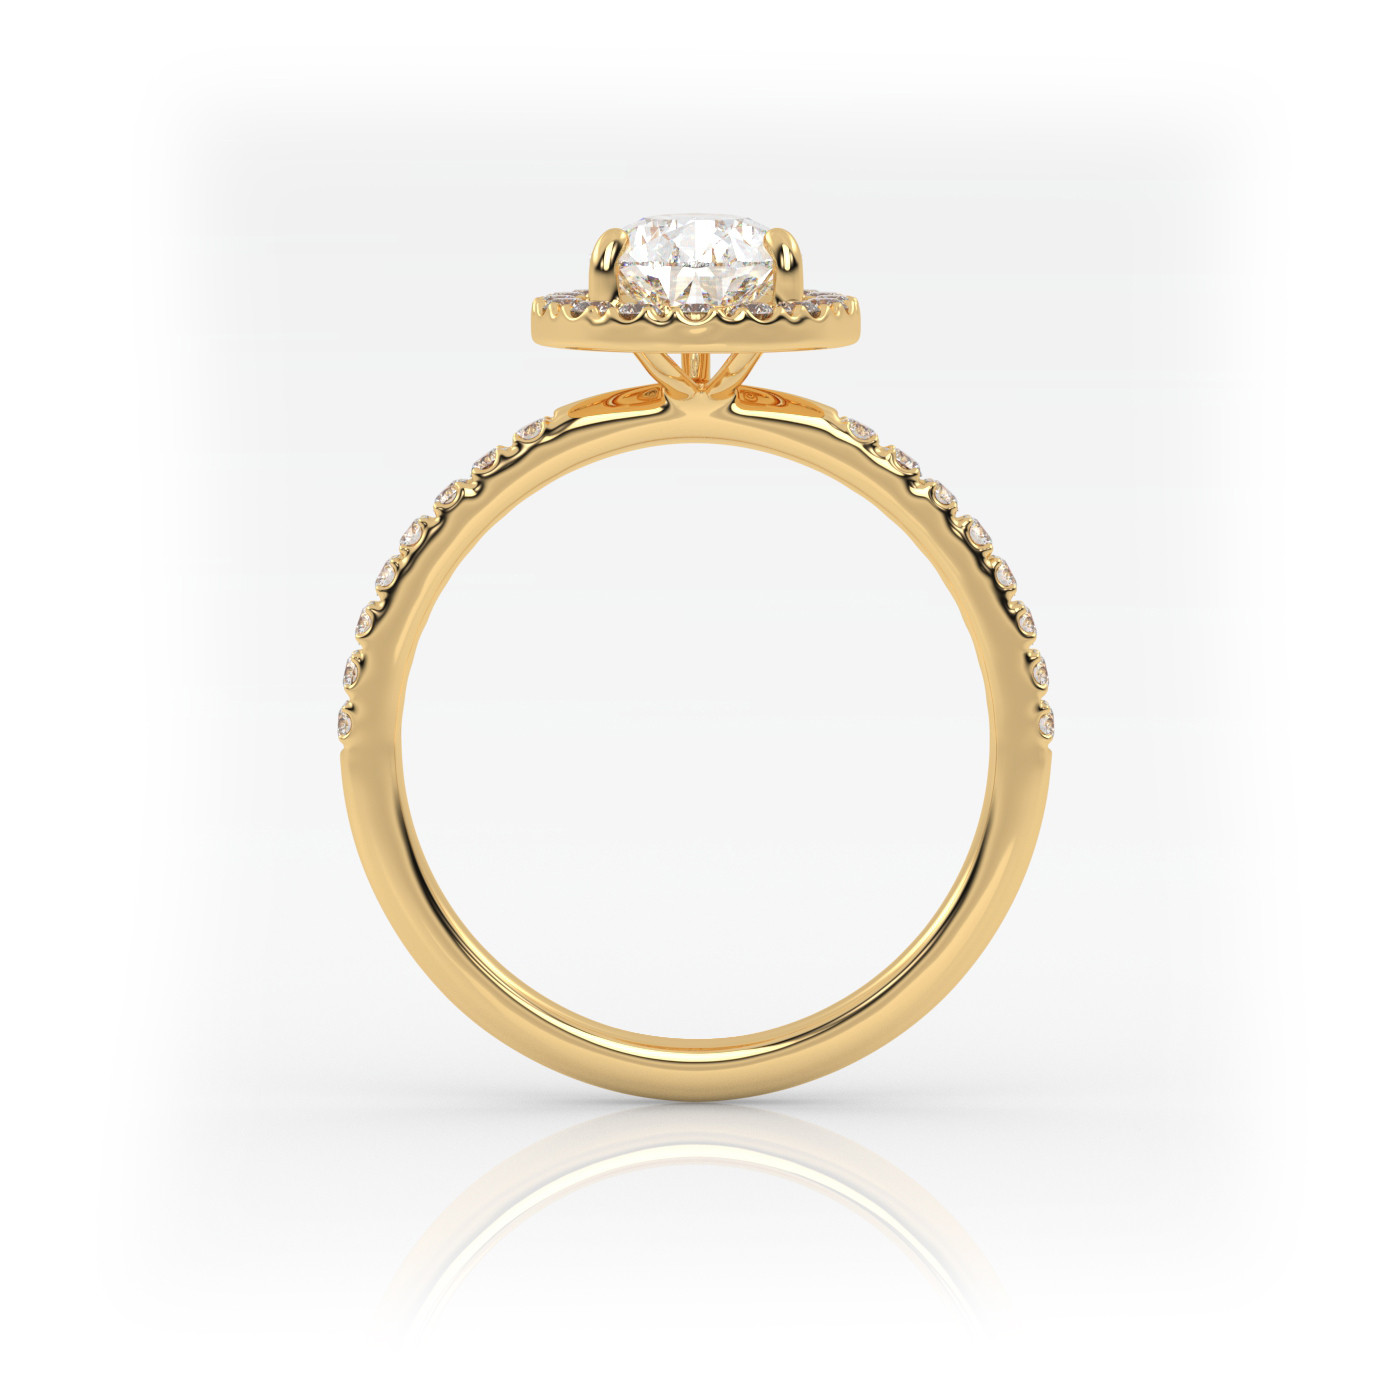 18K YELLOW GOLD Pear Shaped Diamond Engagament Ring with Halo and Pave style